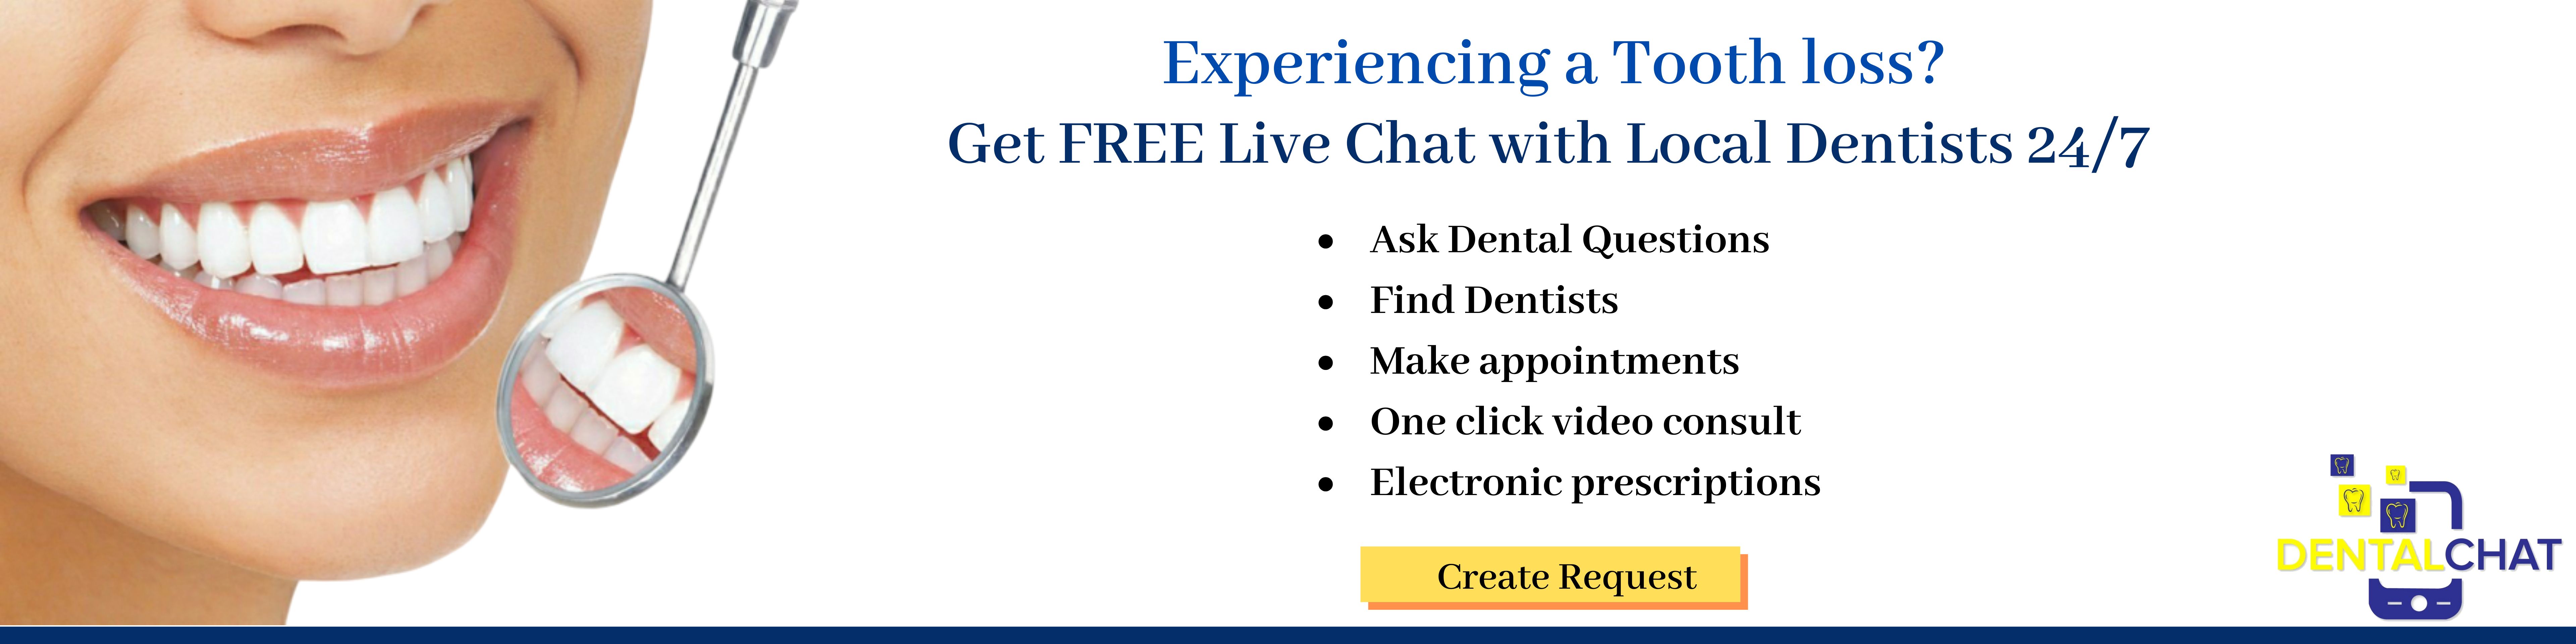 Tooth knocked out of mouth question, tooth avulsion questions chat